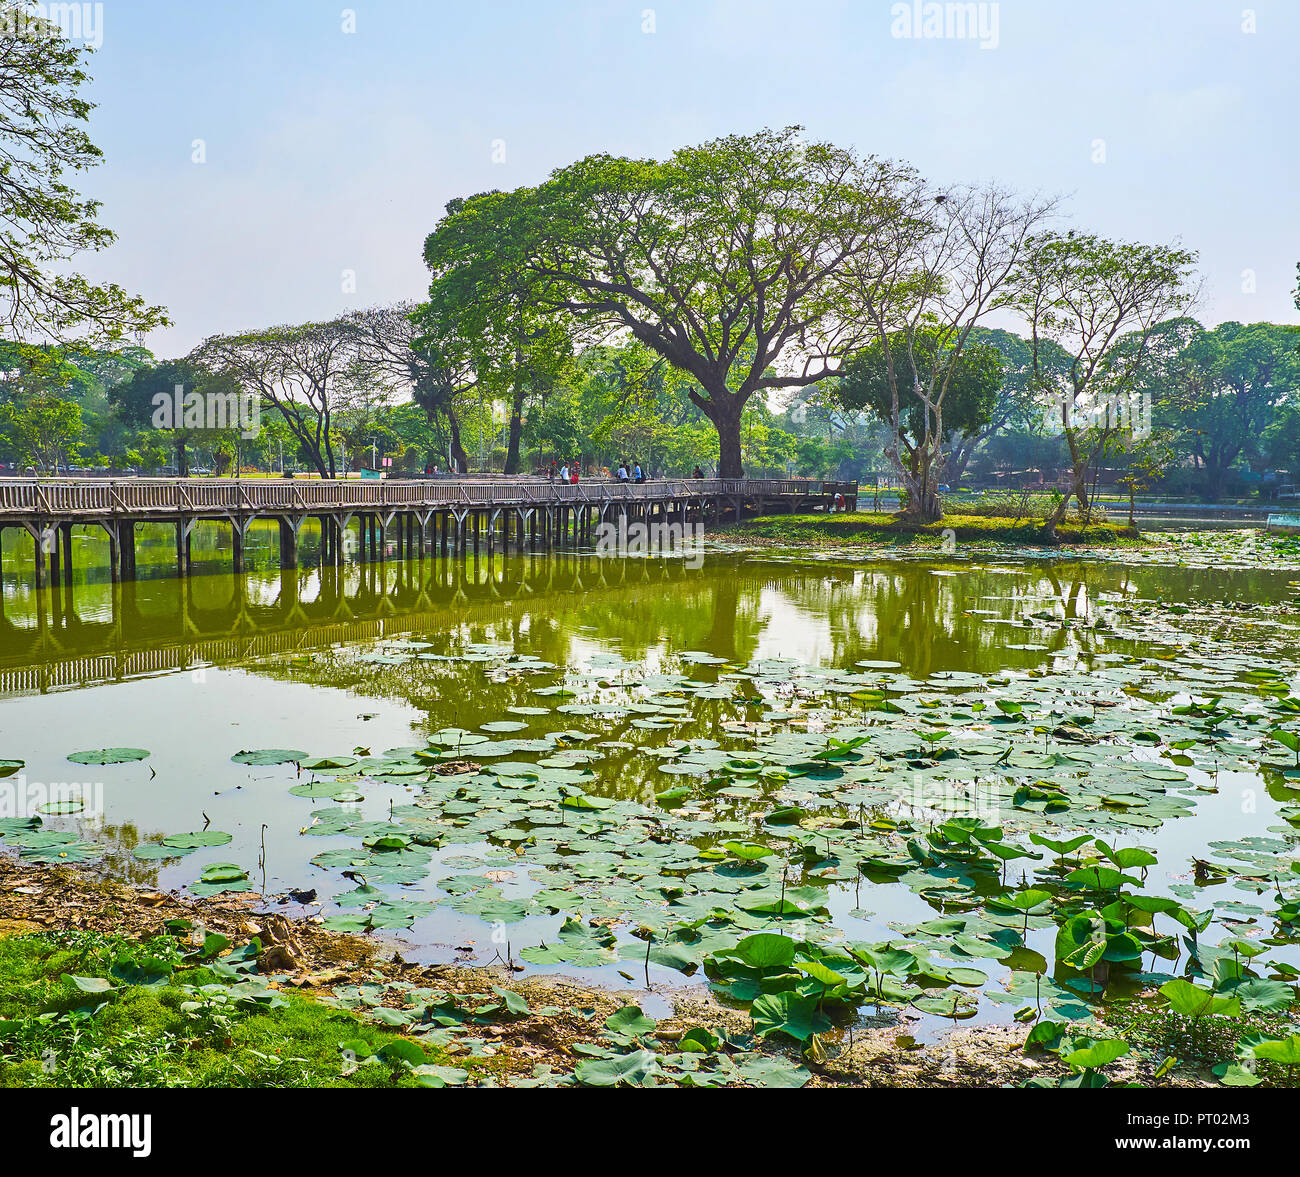 Kandawgyi park is the perfect area for picnics and leisure in scenic spots with a view on the lake with lotus plants, Yangon, Myanmar. Stock Photo